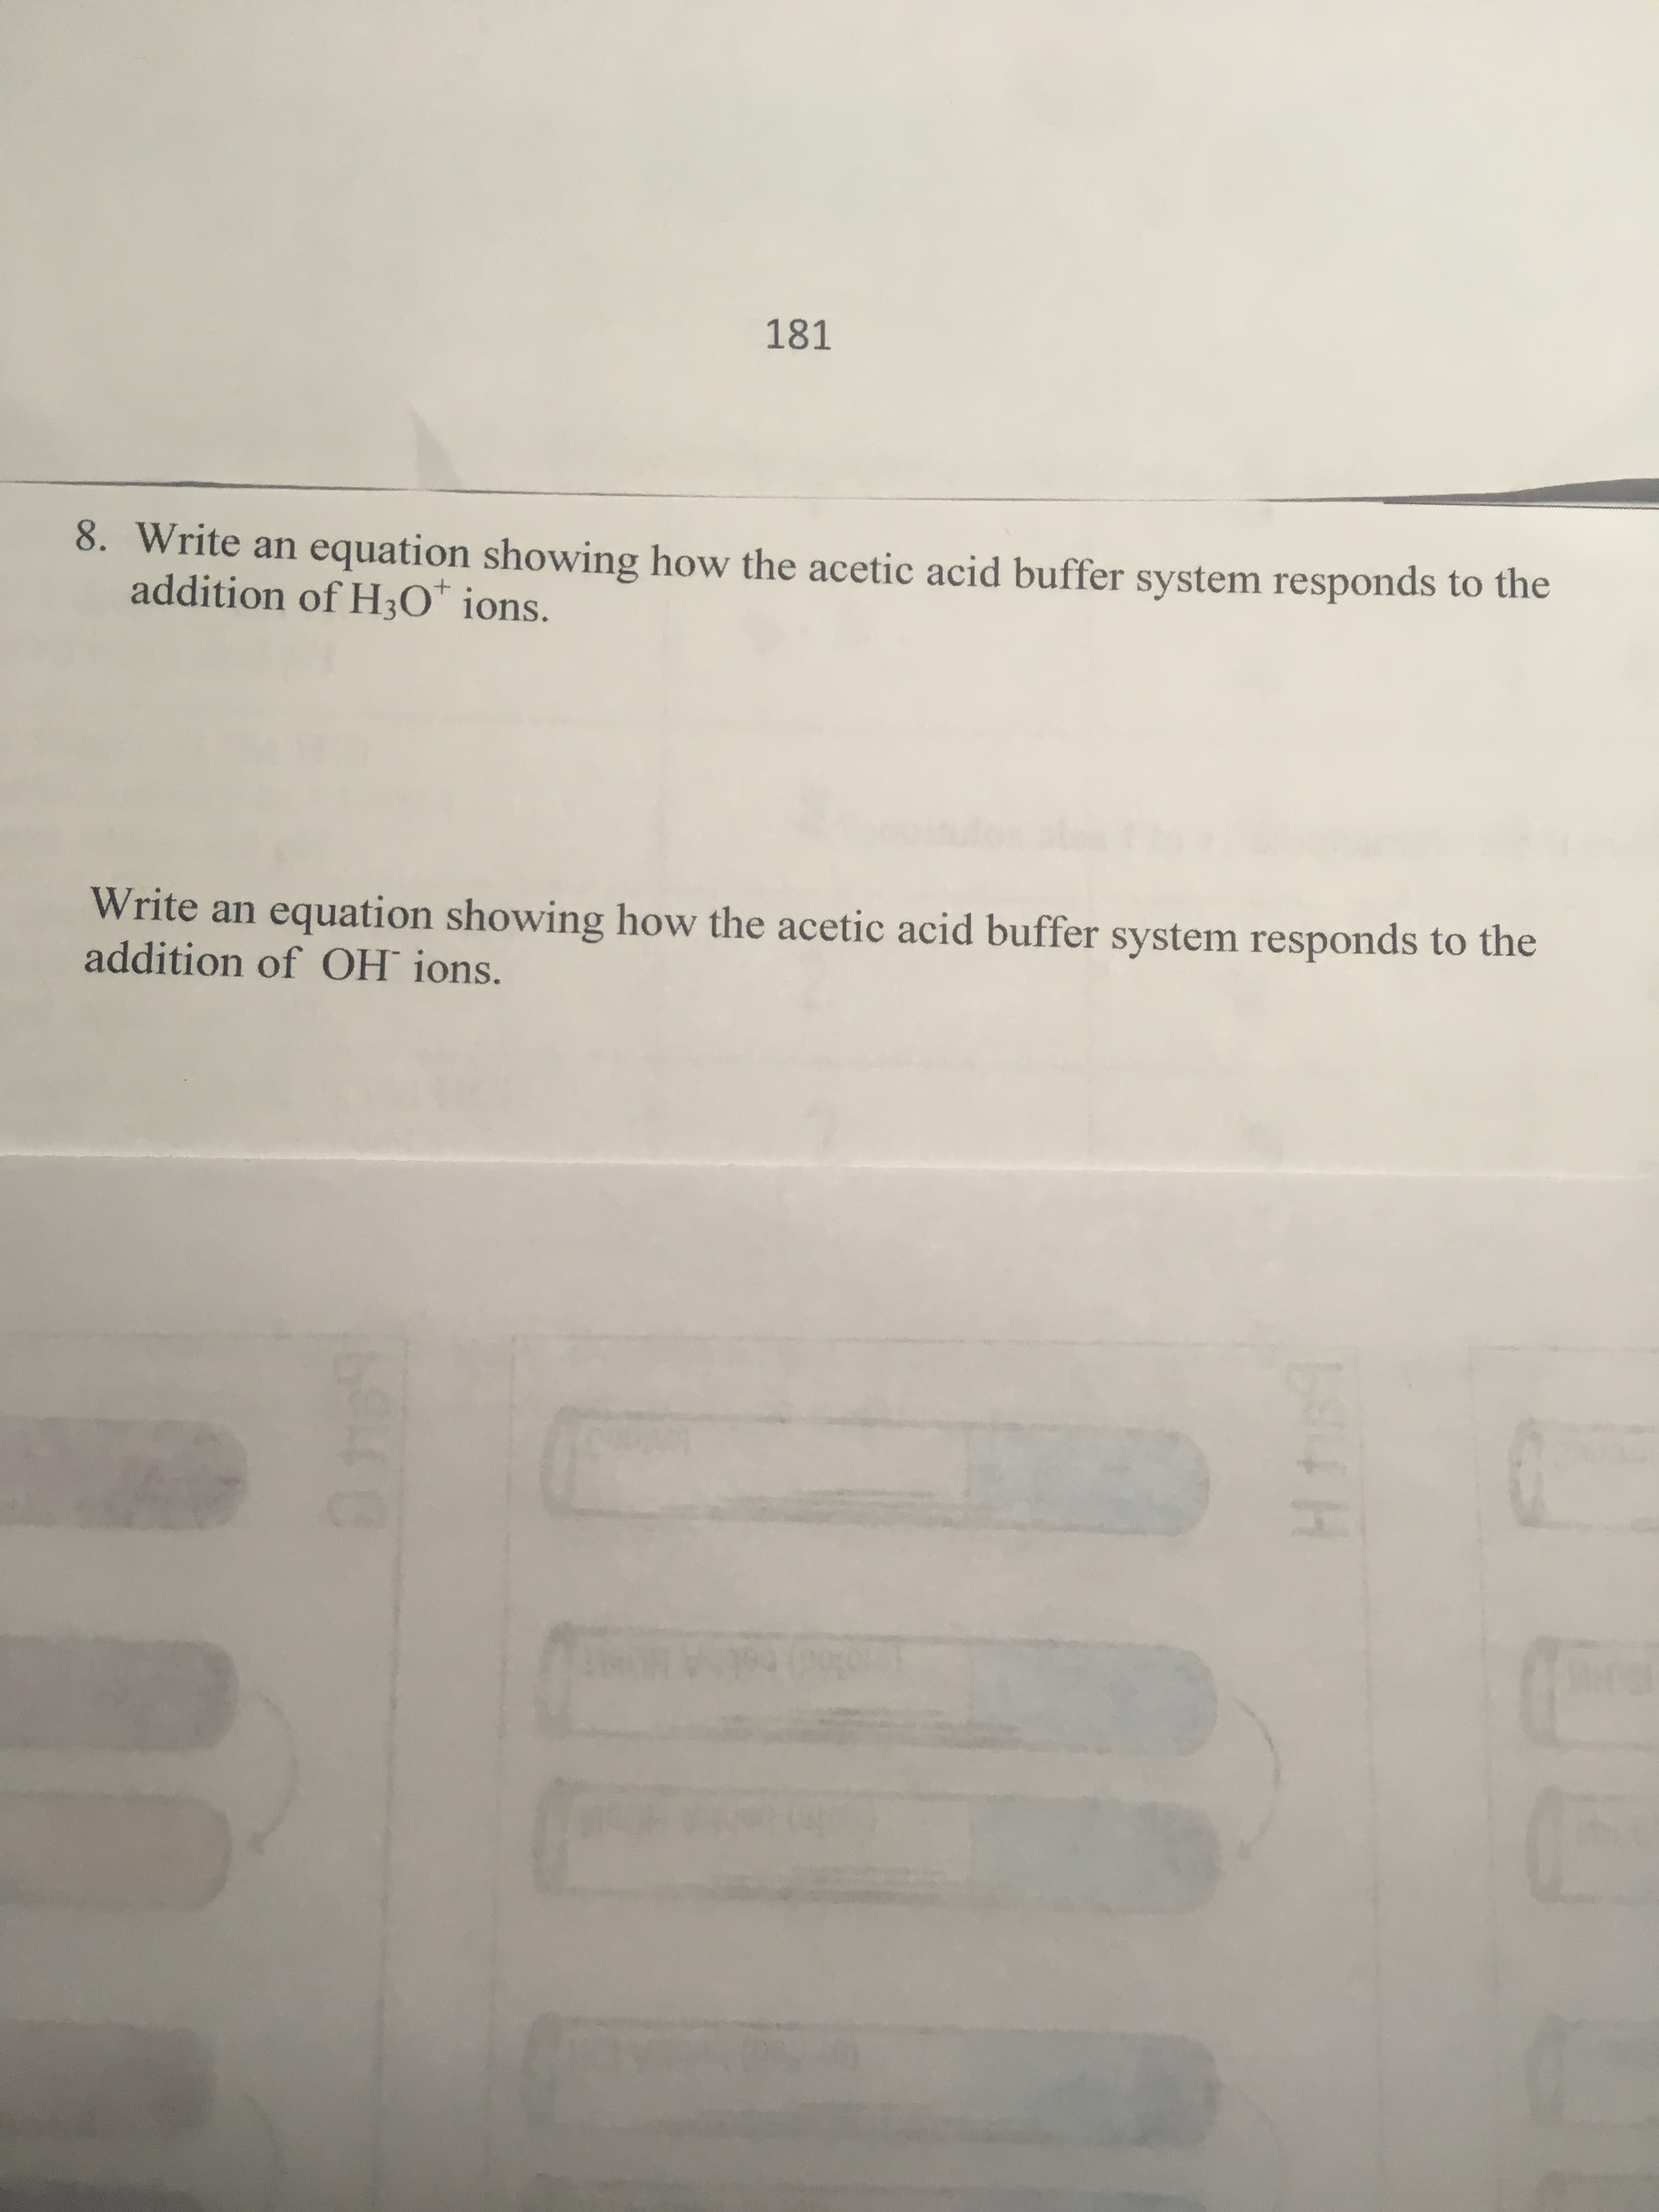 Write an equation showing how the acetic acid buffer system responds to the
ddition of H30" ions.
ite an equation showing how the acetic acid buffer system responds to the
lition of OH ions.
